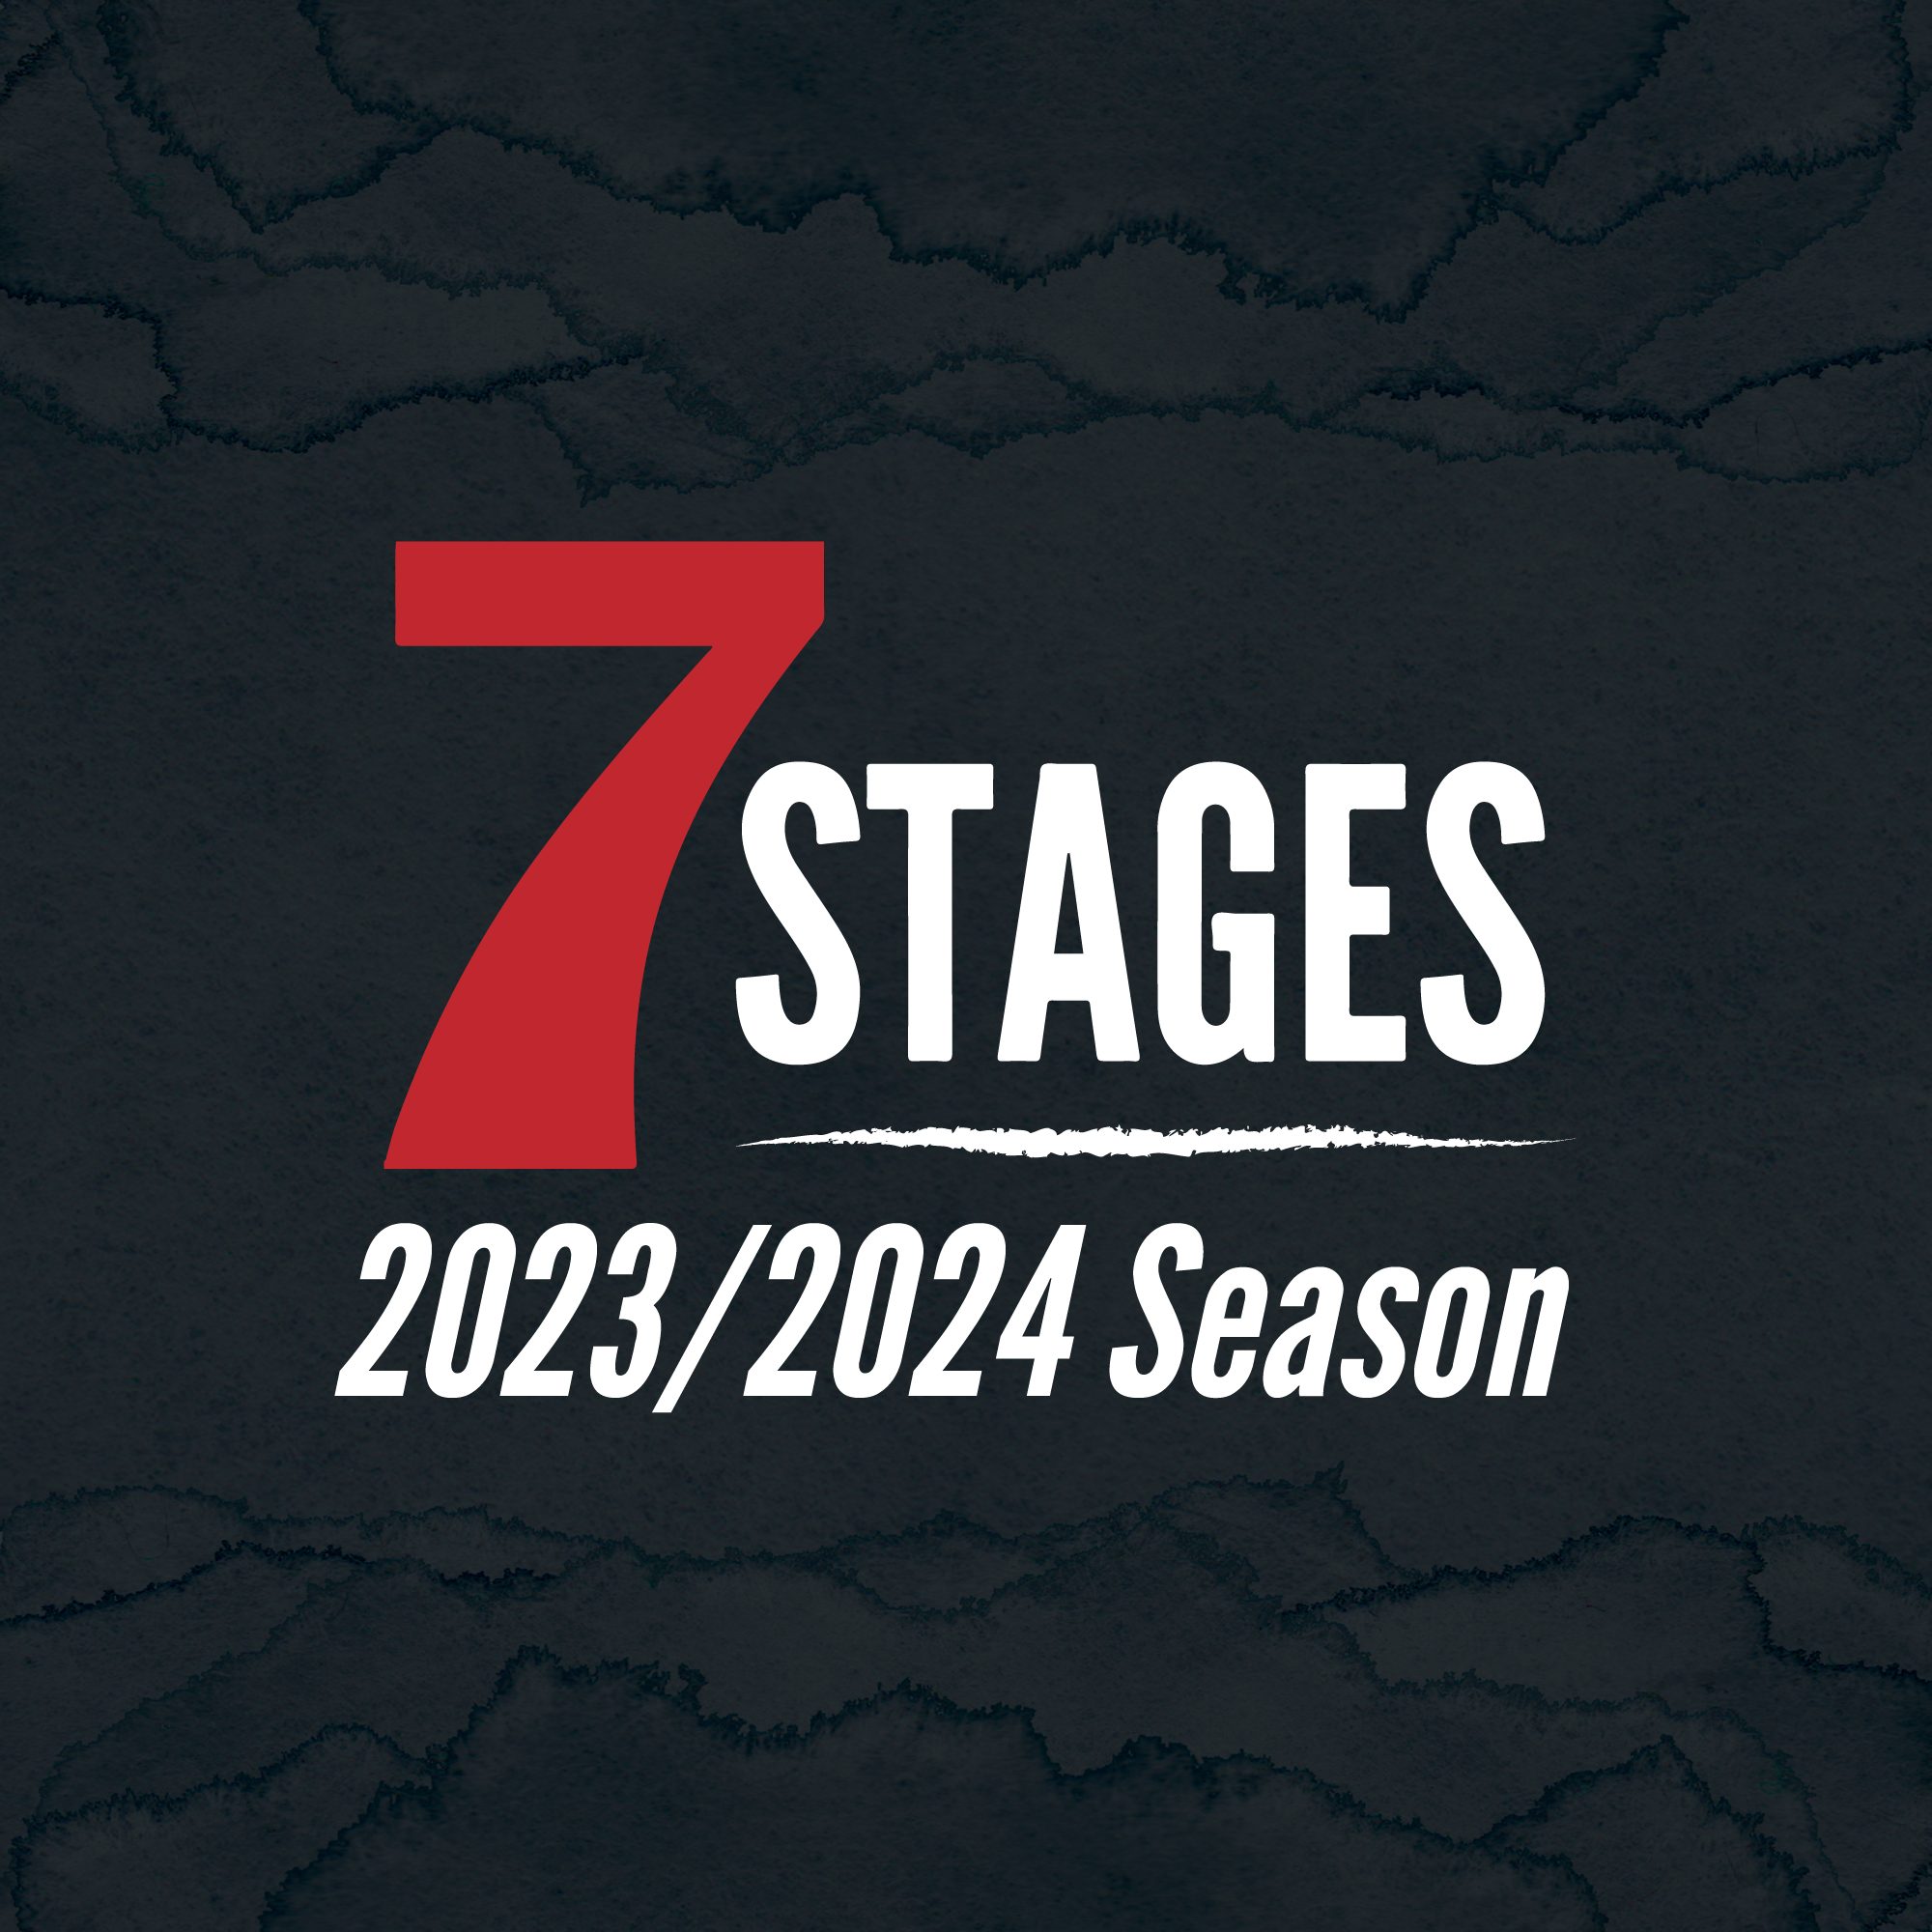 7 Stages 2023 2024 Season